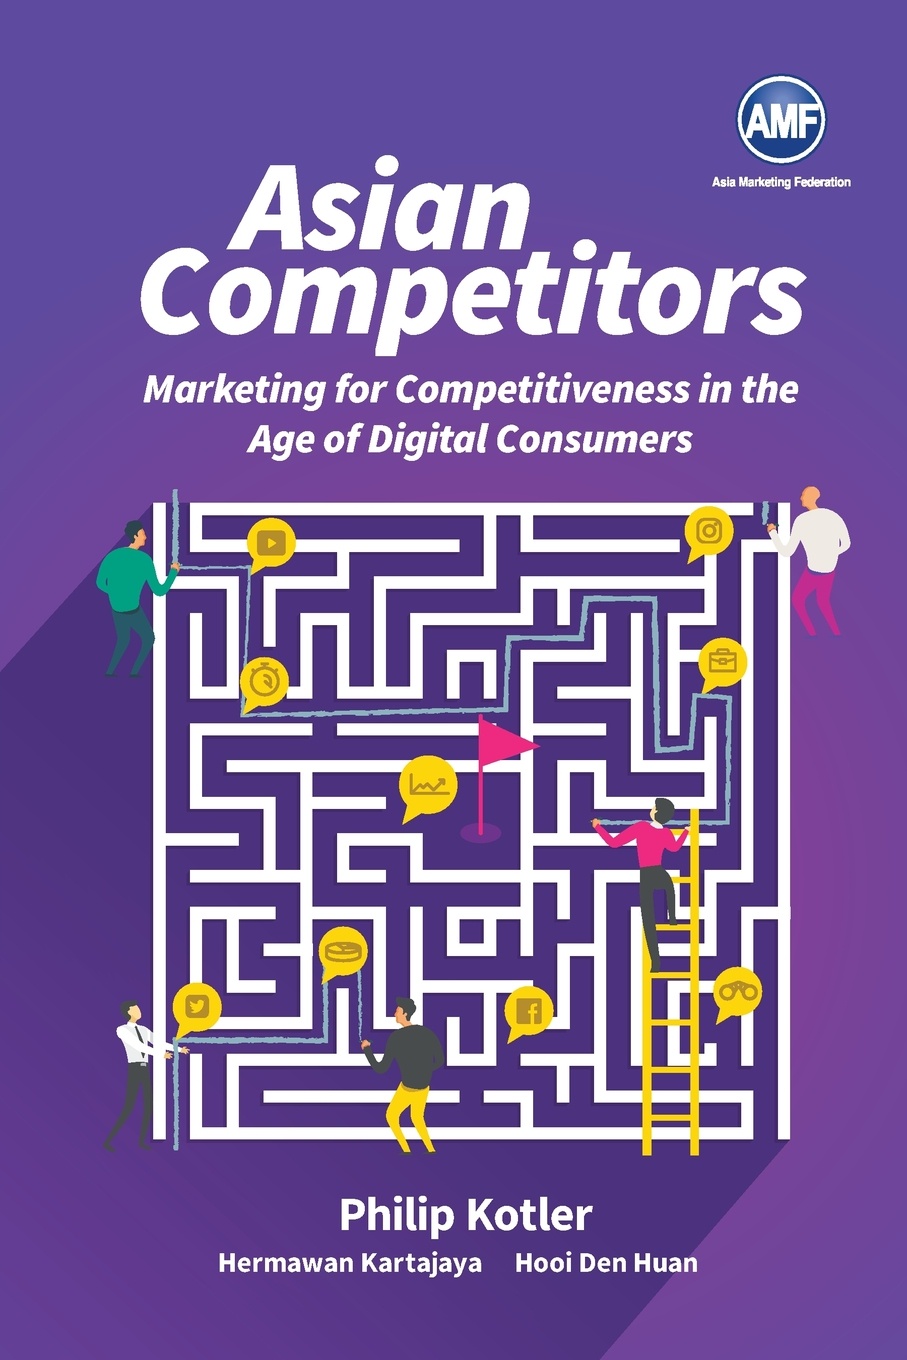 Asian Competitors. Marketing for Competitiveness in the Age of Digital Consumers